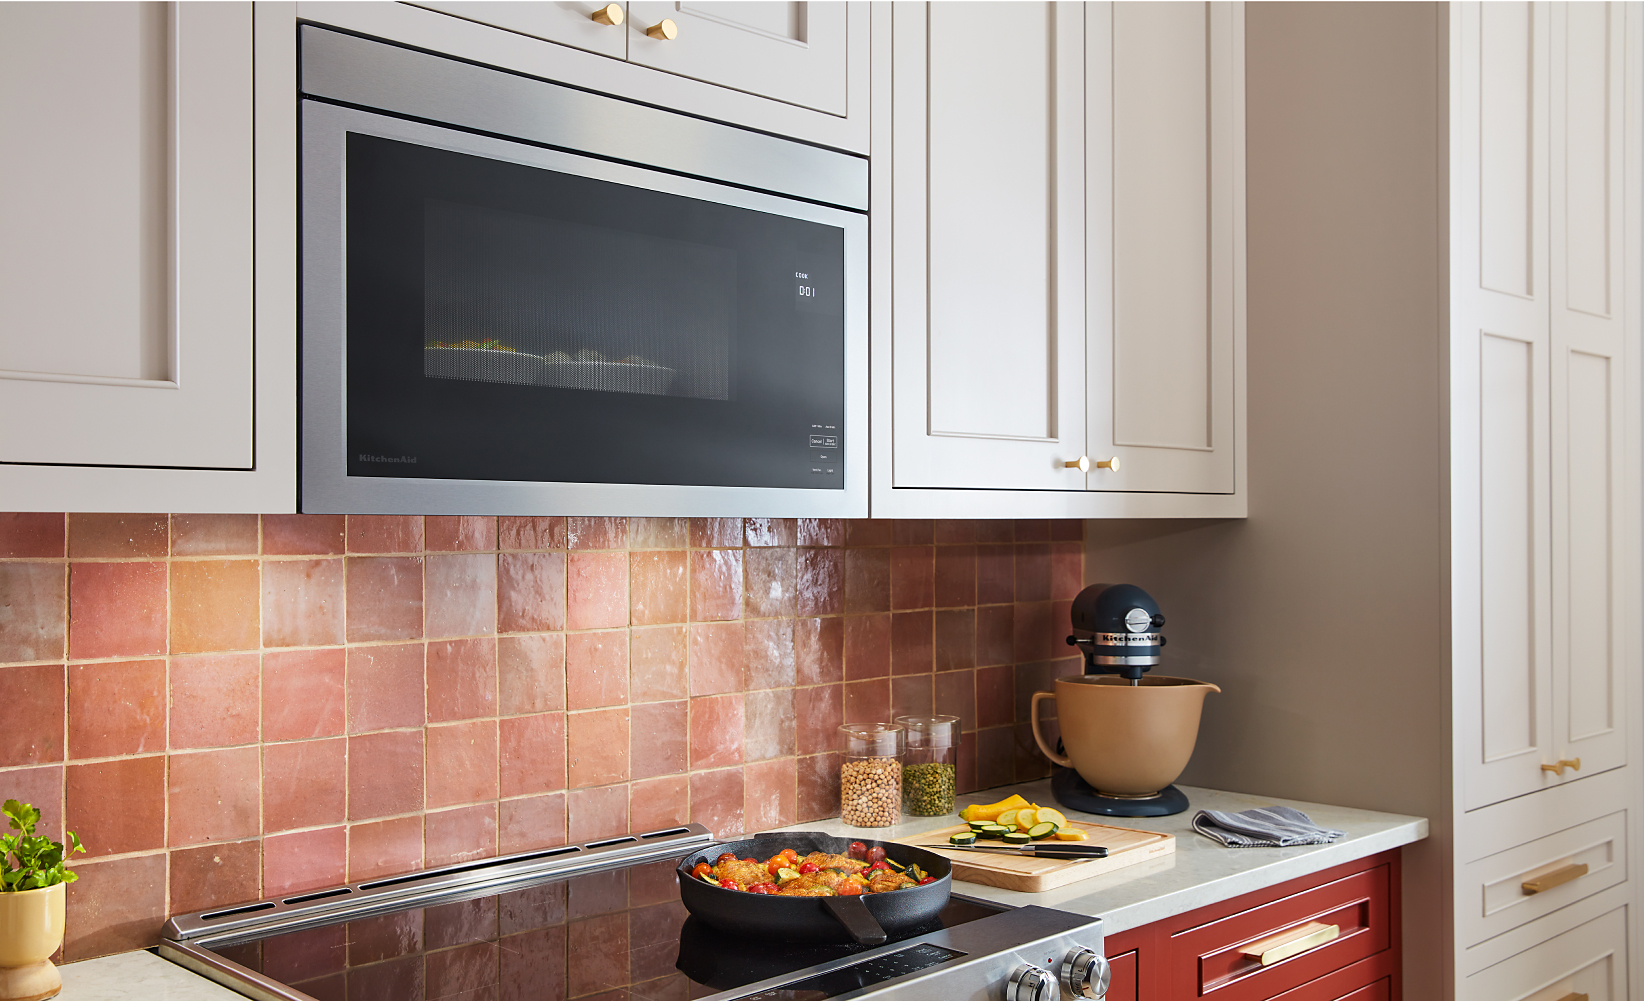 A flush built-in over-the-range microwave installed in cream cabinetry above a radiant electric cooktop with a frying pan of cooking veggies.